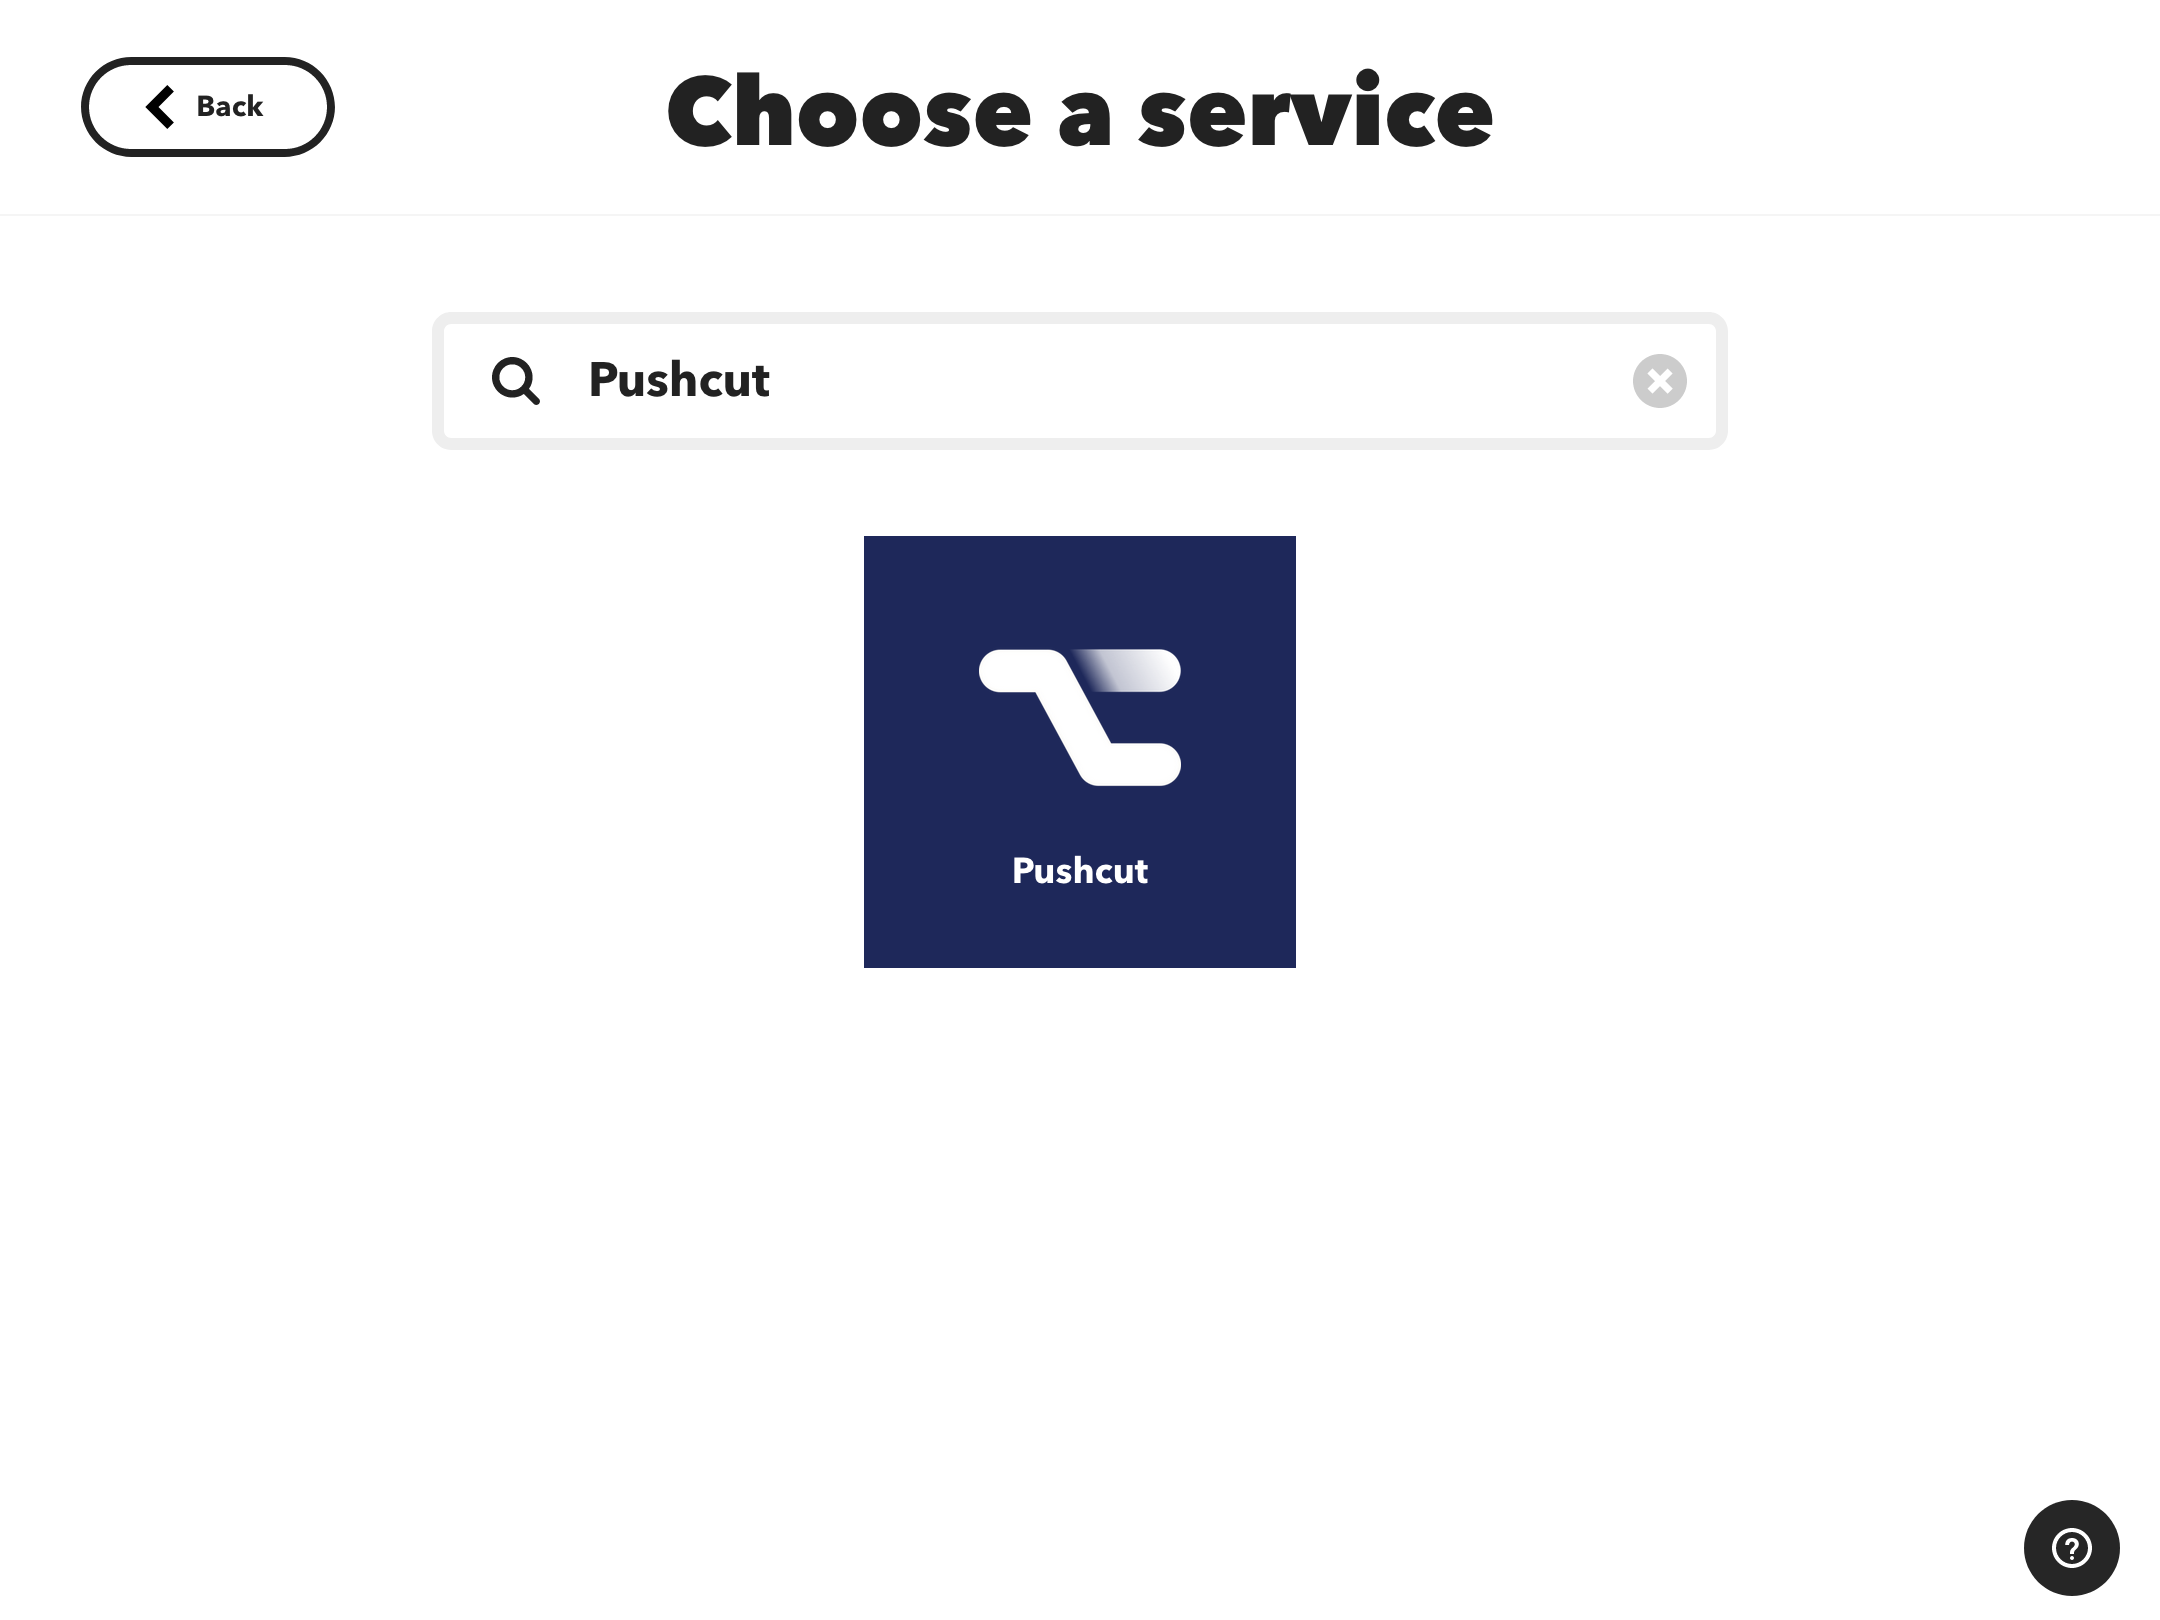 IFTTT: Search for Pushcut